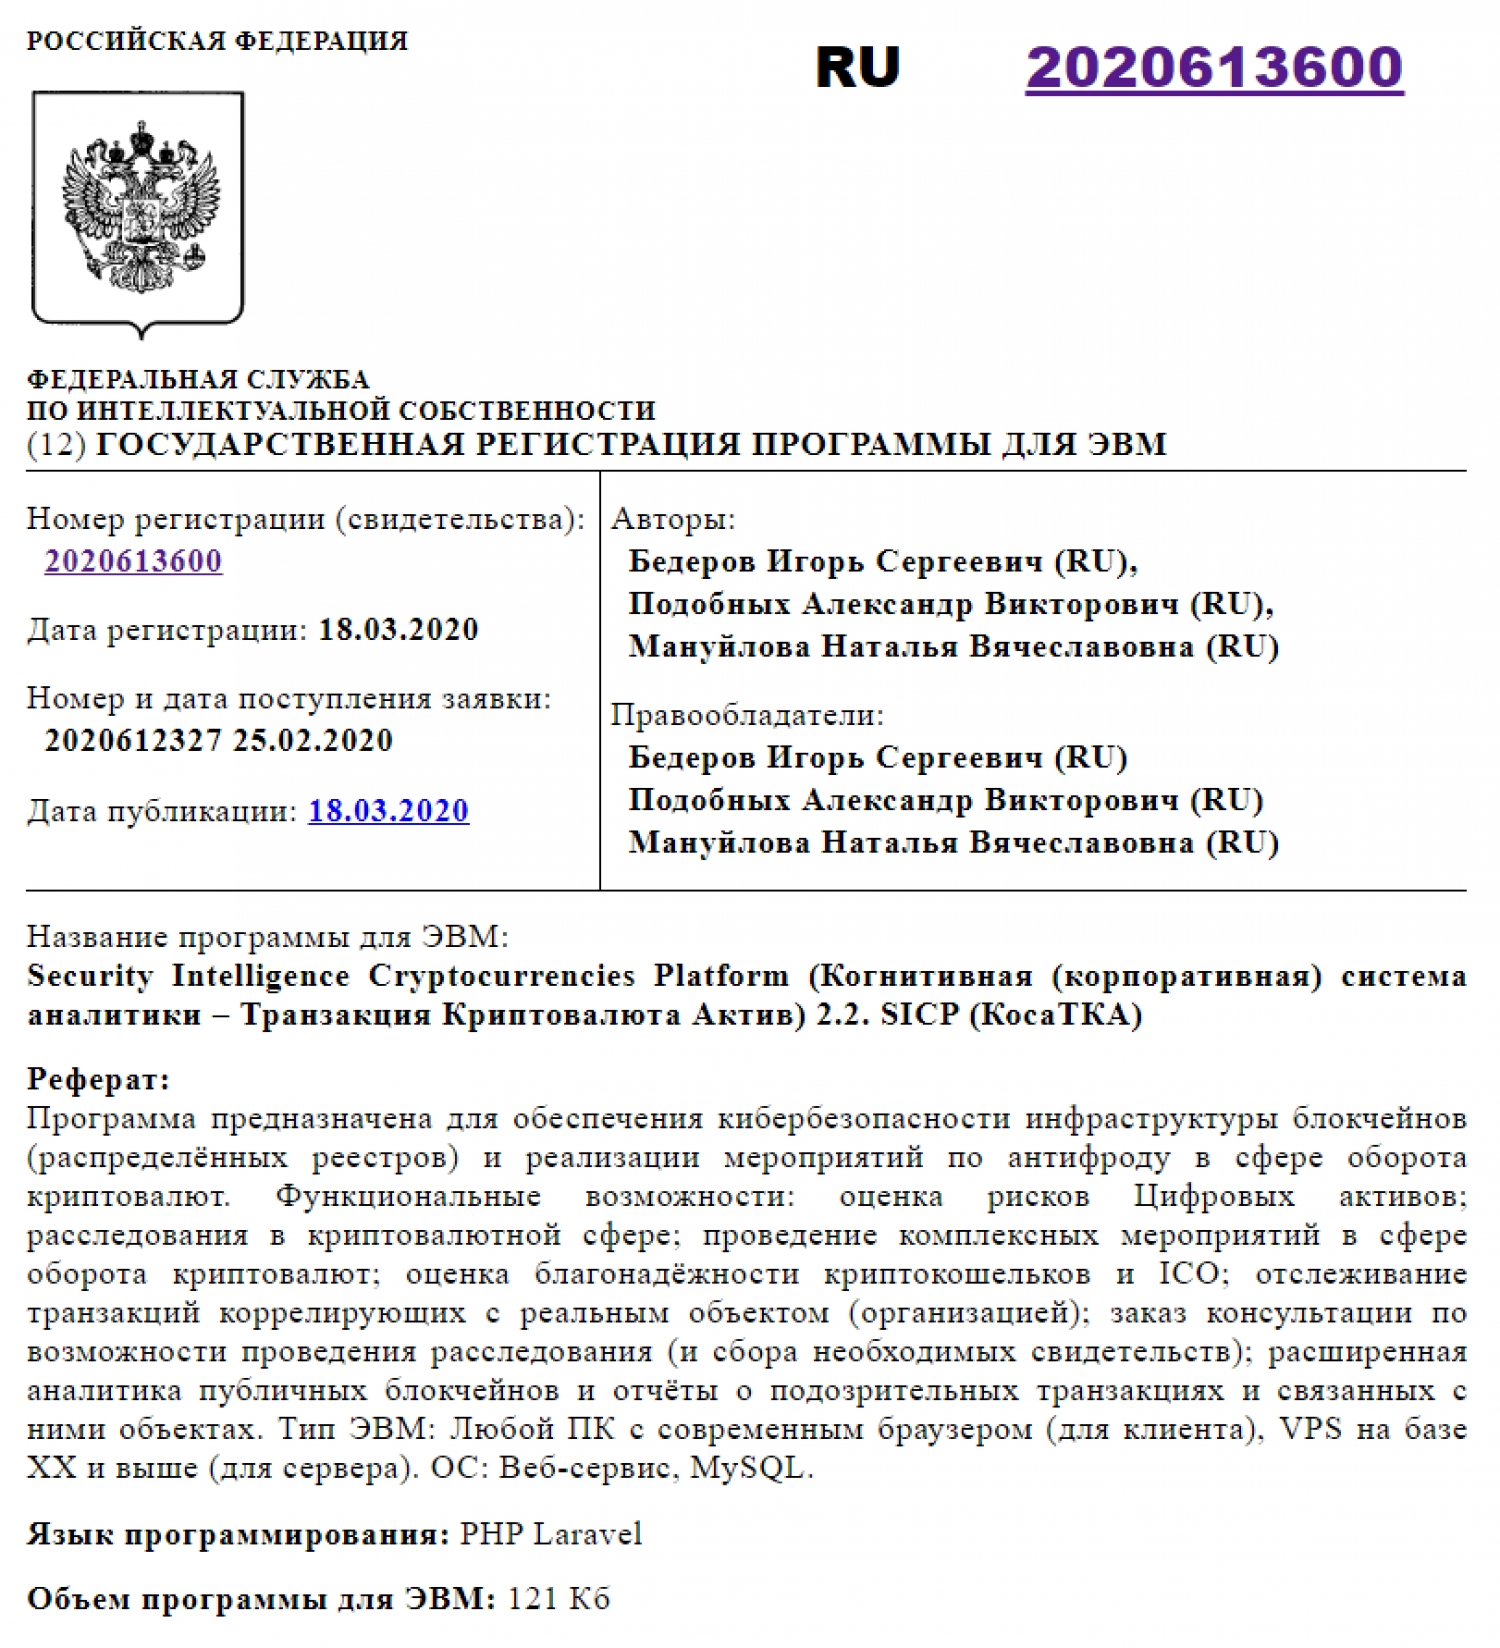 SICP PASSED STATE REGISTRATION IN THE FEDERAL SERVICE FOR INTELLECTUAL PROPERTY OF THE RUSSIAN FEDERATION